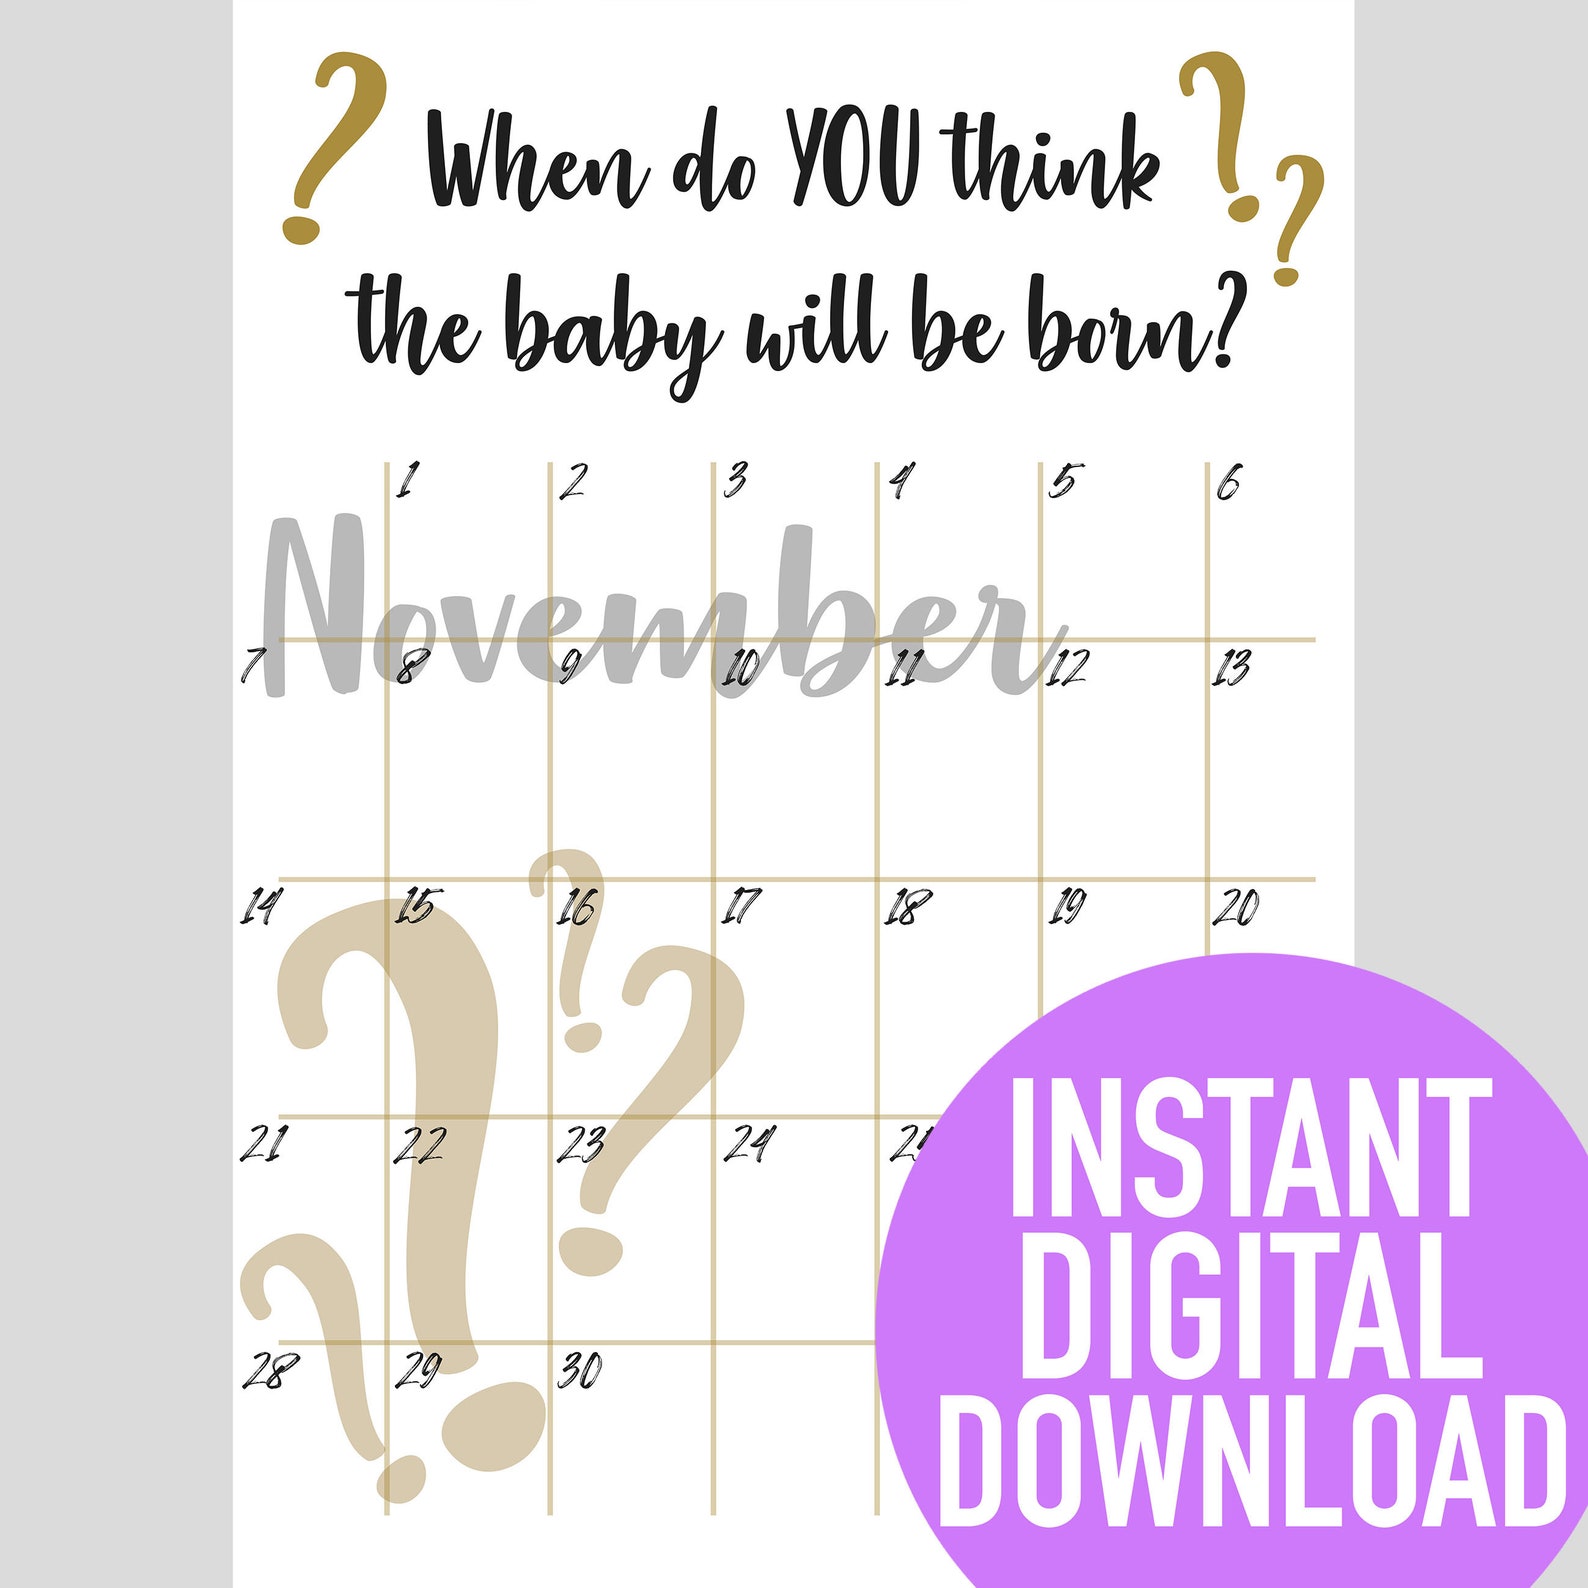 calendar for guessing baby due date 6